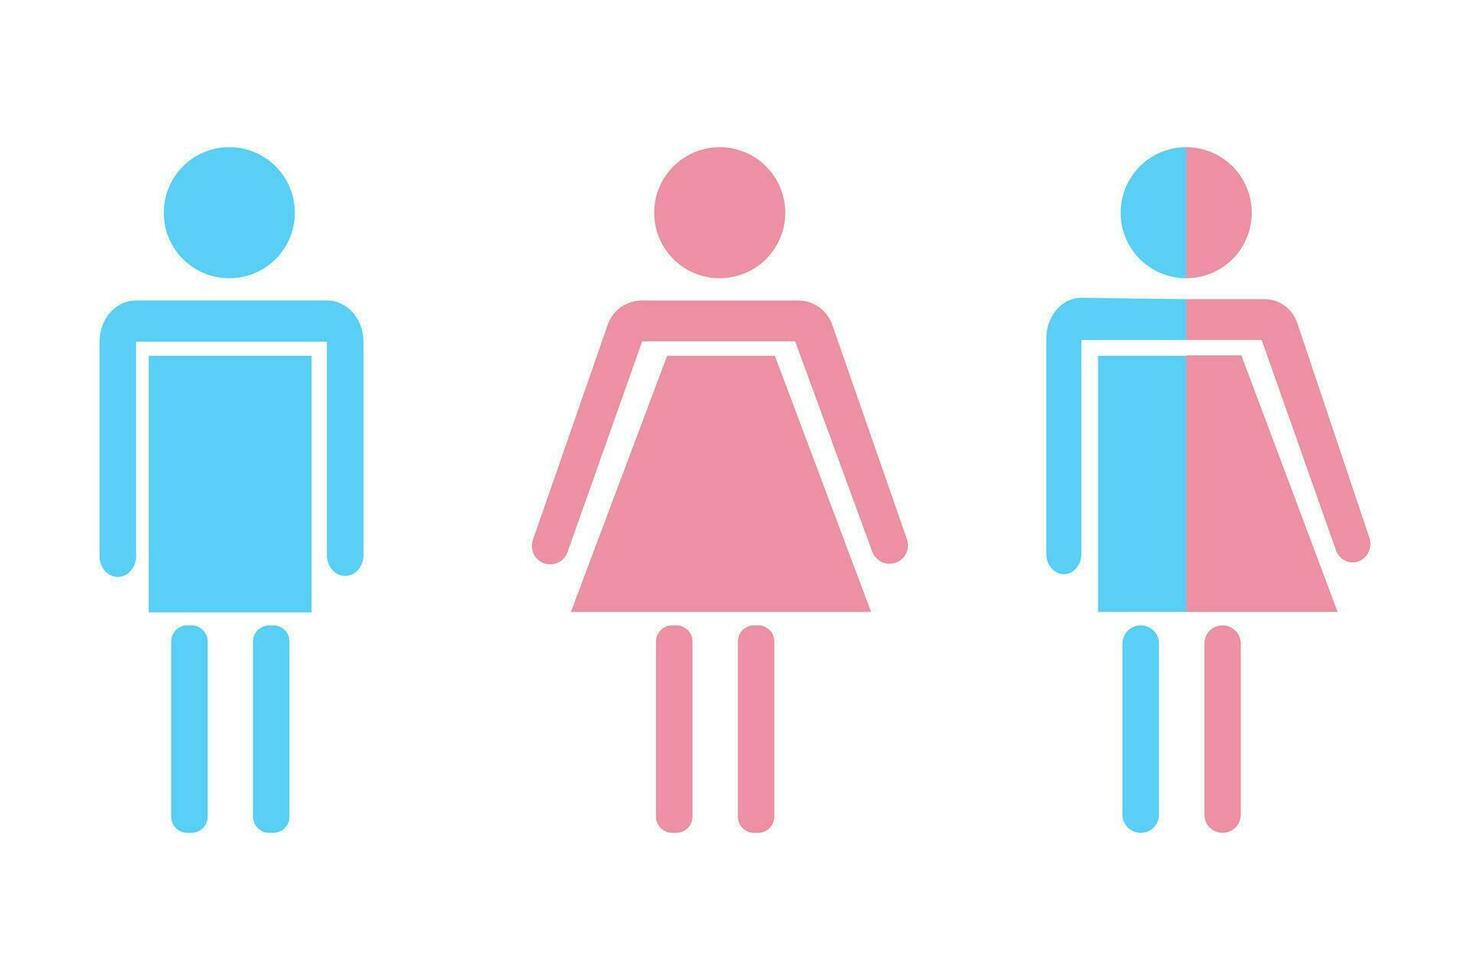 Male, female and transgender symbol. Gender icons in pink and blue colors. Flat vector illustration.